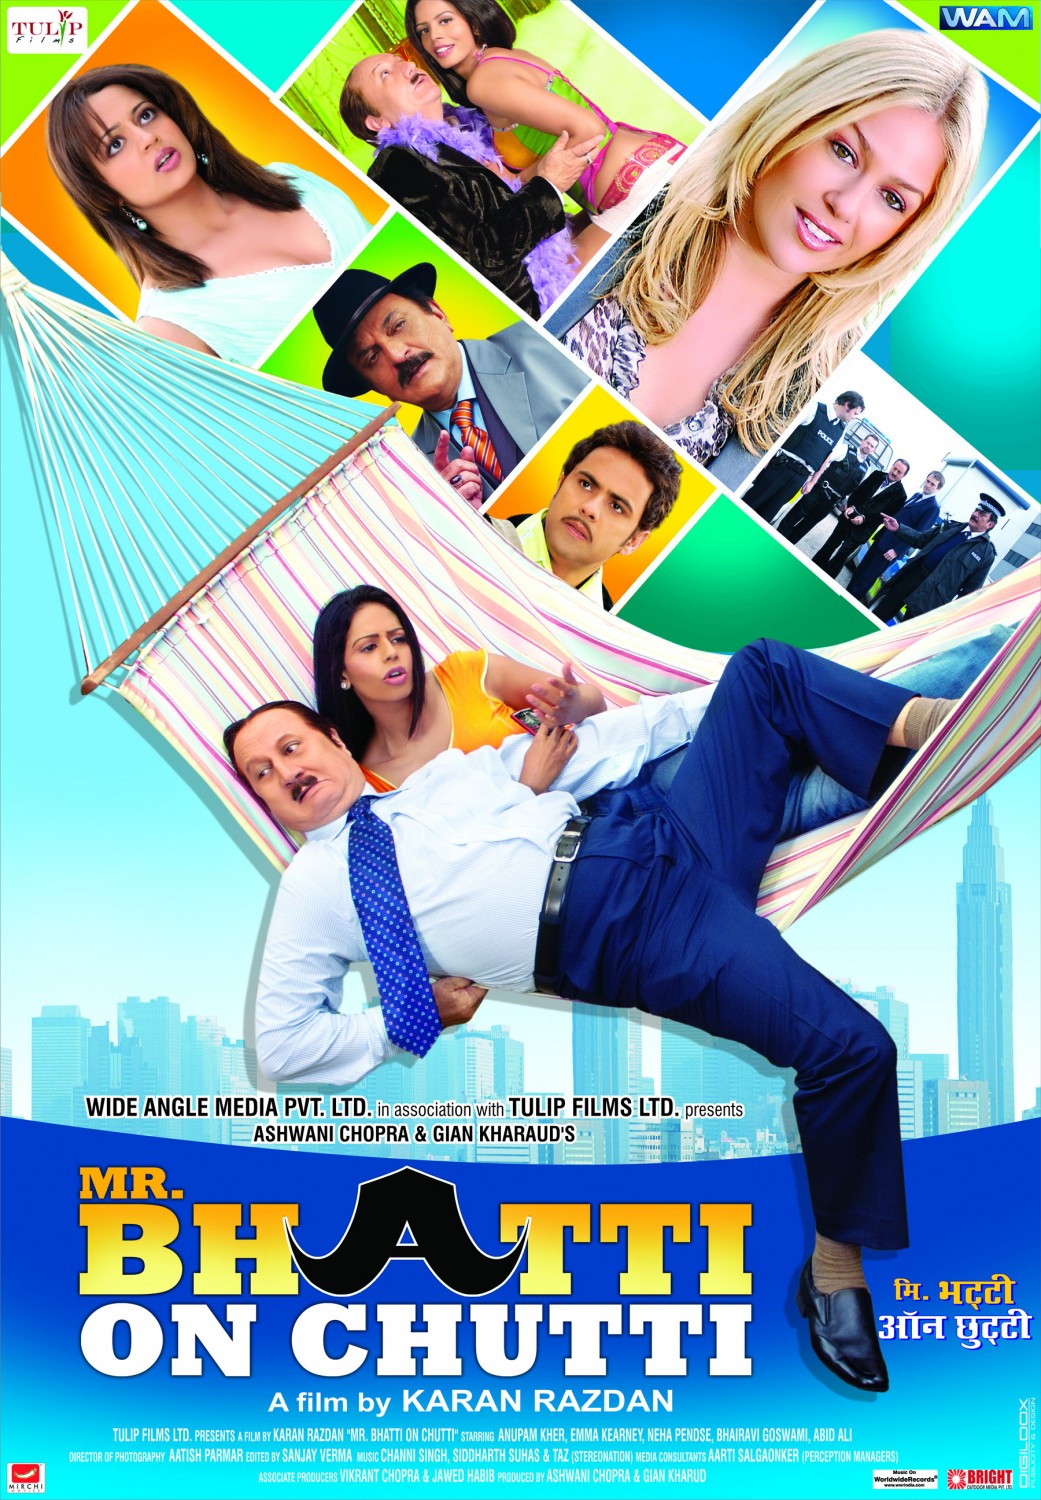 Extra Large Movie Poster Image for Mr Bhatti on Chutti 